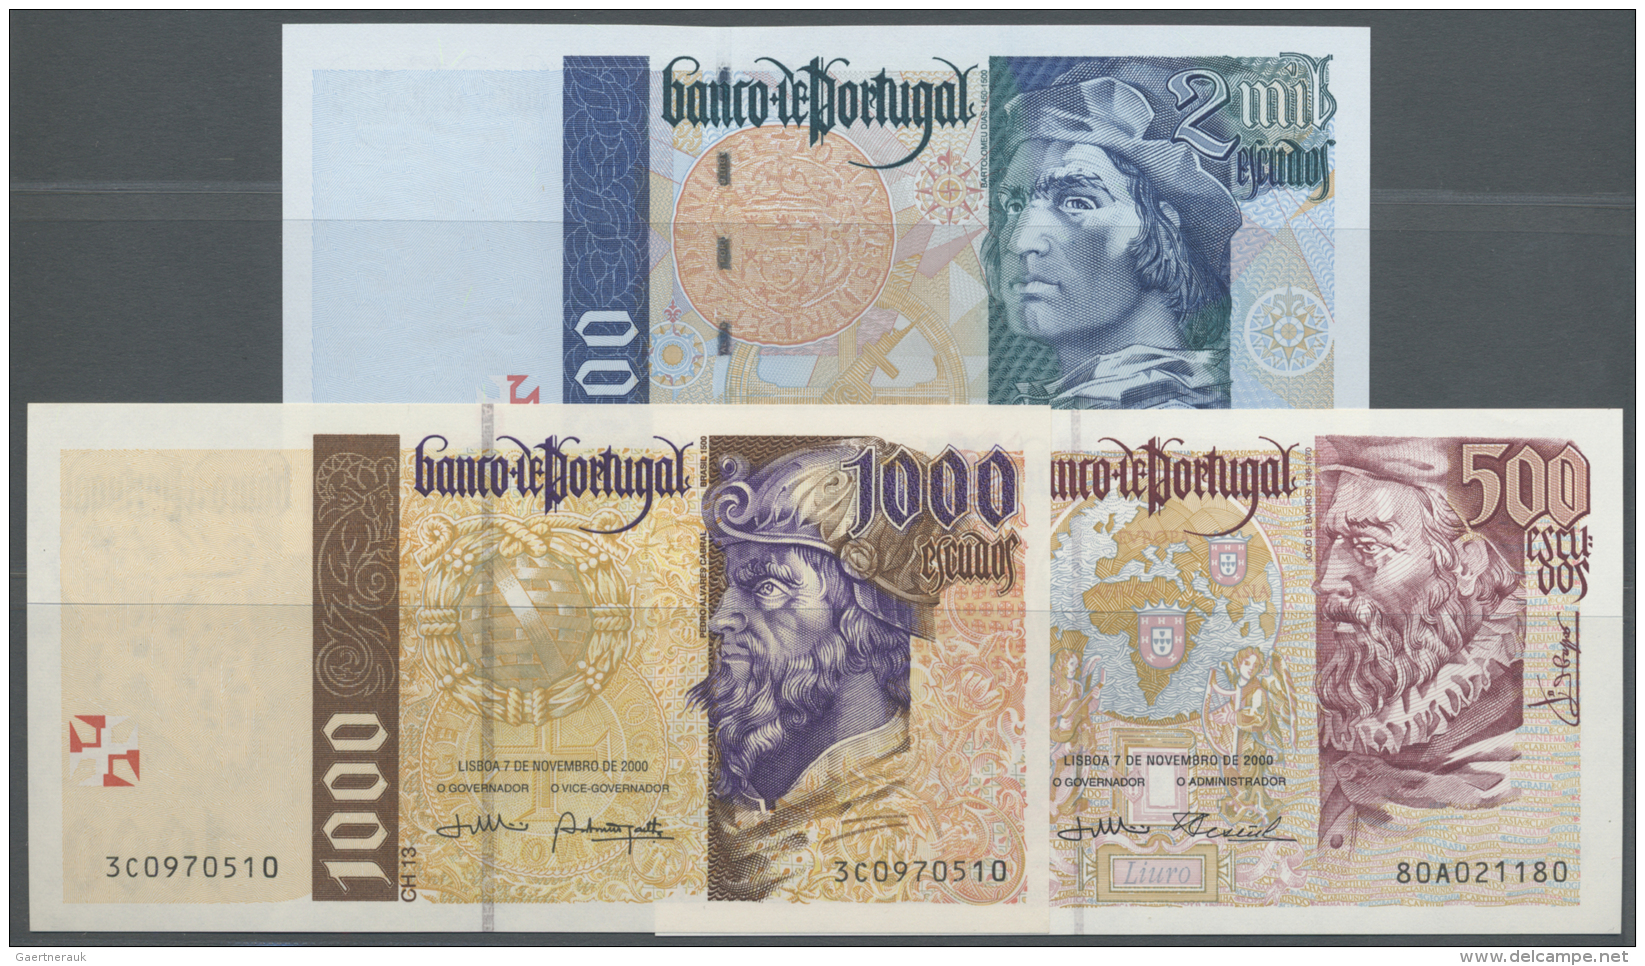 Portugal: Set Of 3 Notes Containing 500, 1000 And 2000 Escudos P. 187c, 188d, 189c, All In Condition: UNC. (3 Pcs) - Portugal